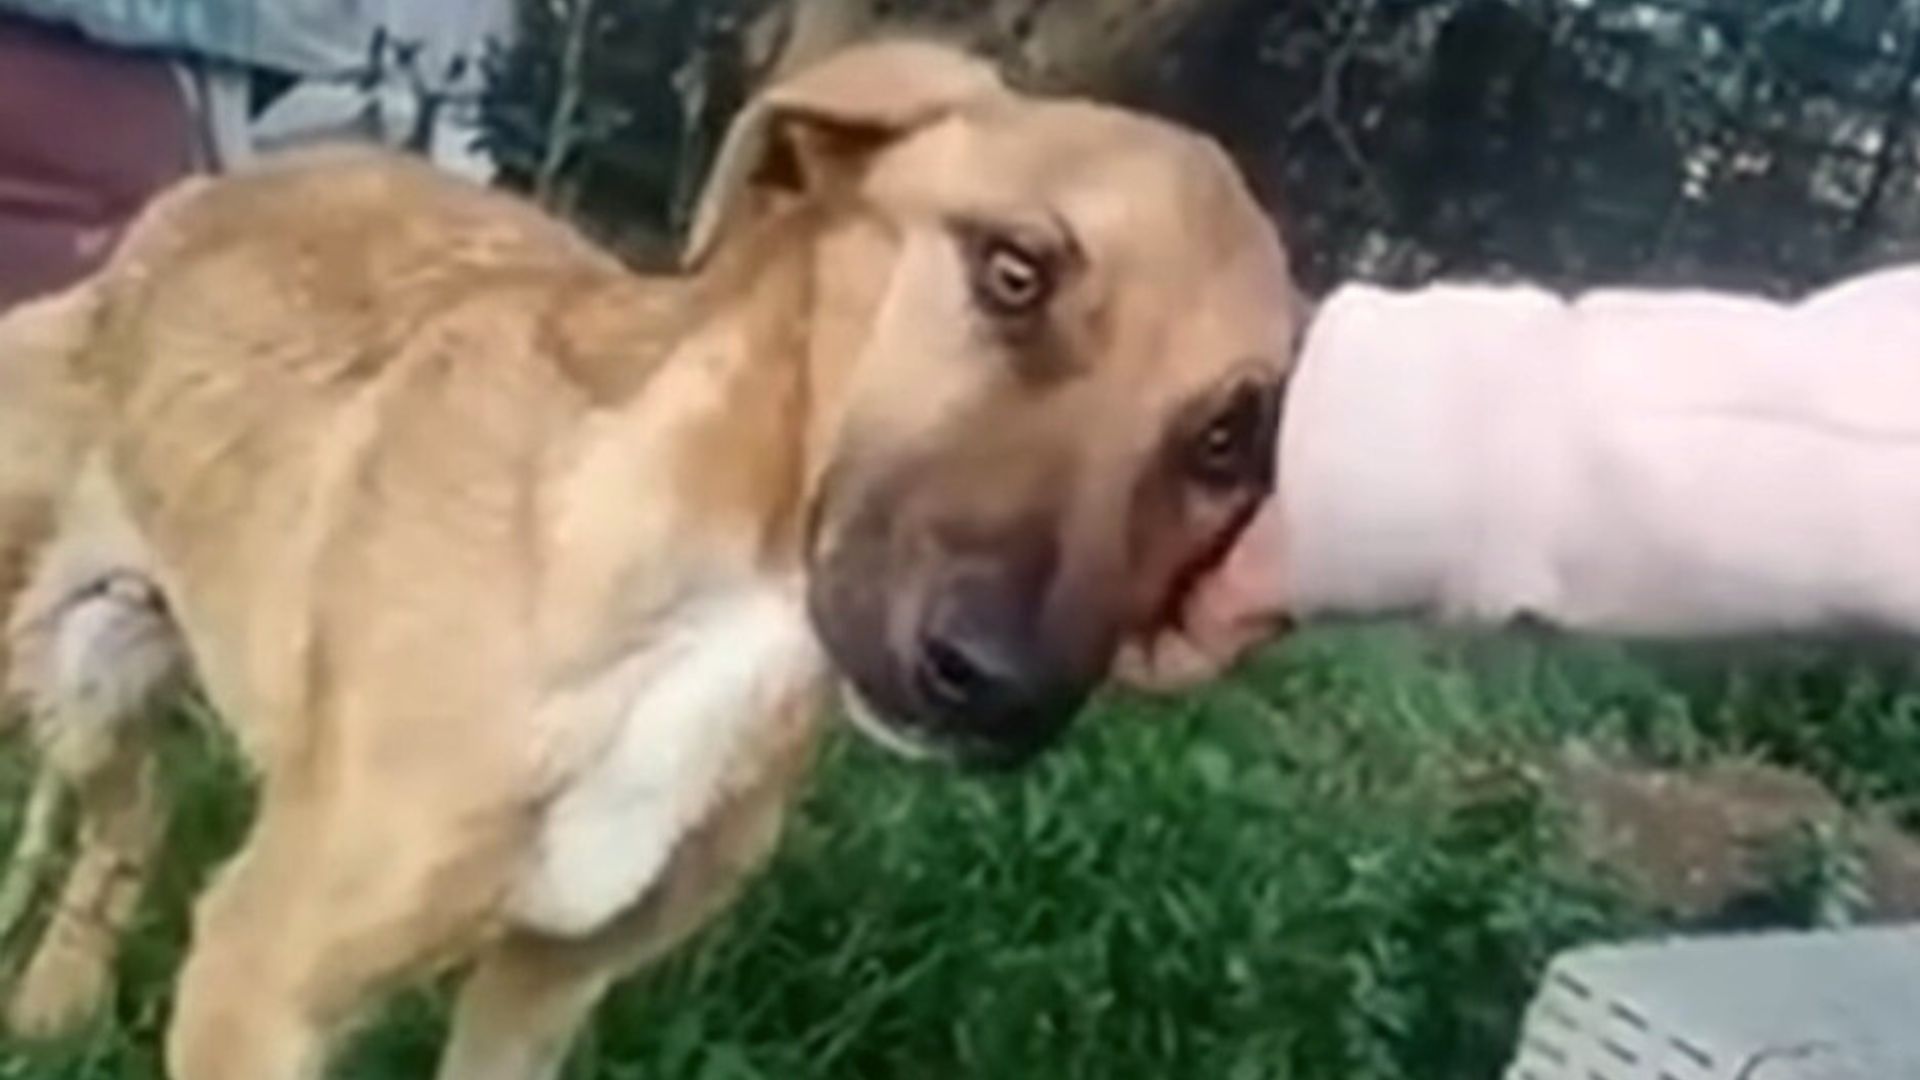 Starving Dog Who Desperately Needed Help Begged His Rescuer To Save Him